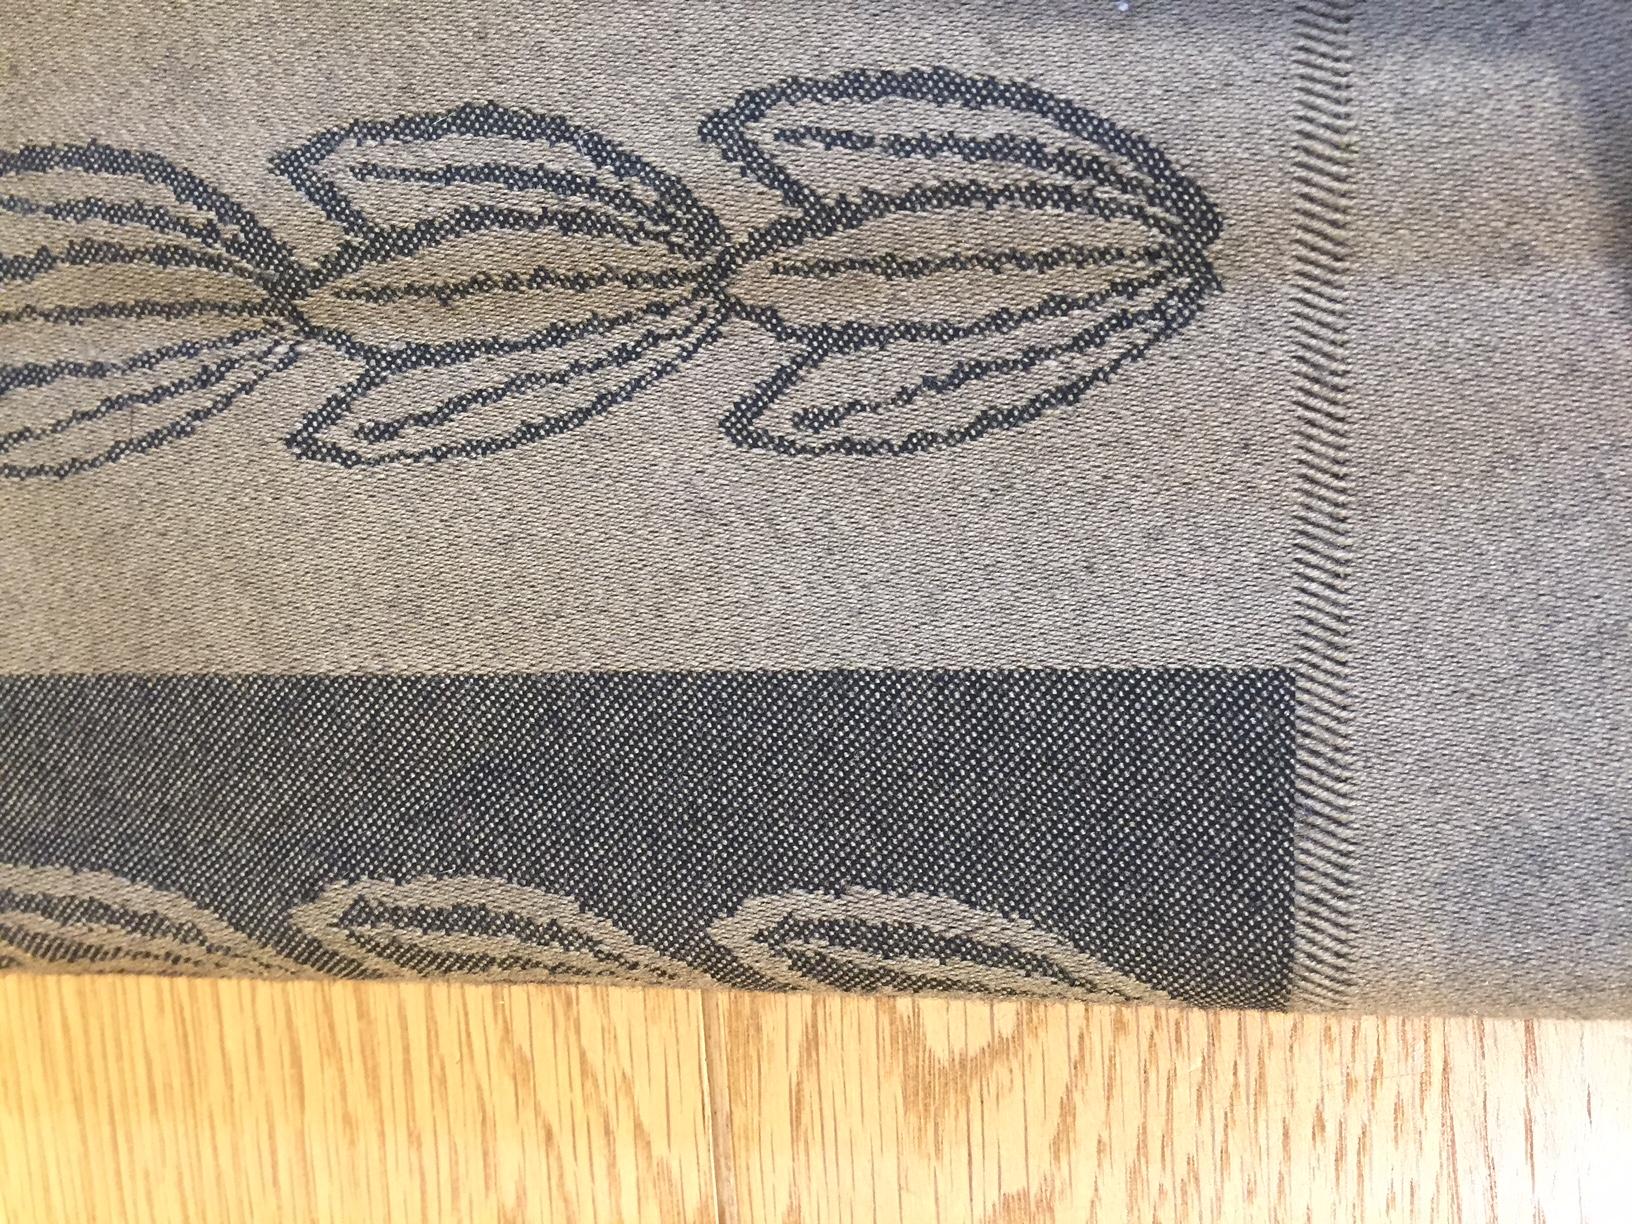 Throw Jacques Gracia Collection by Baker, with fringes on both sides, size 148x182cm, 100% wool, made in U.K.